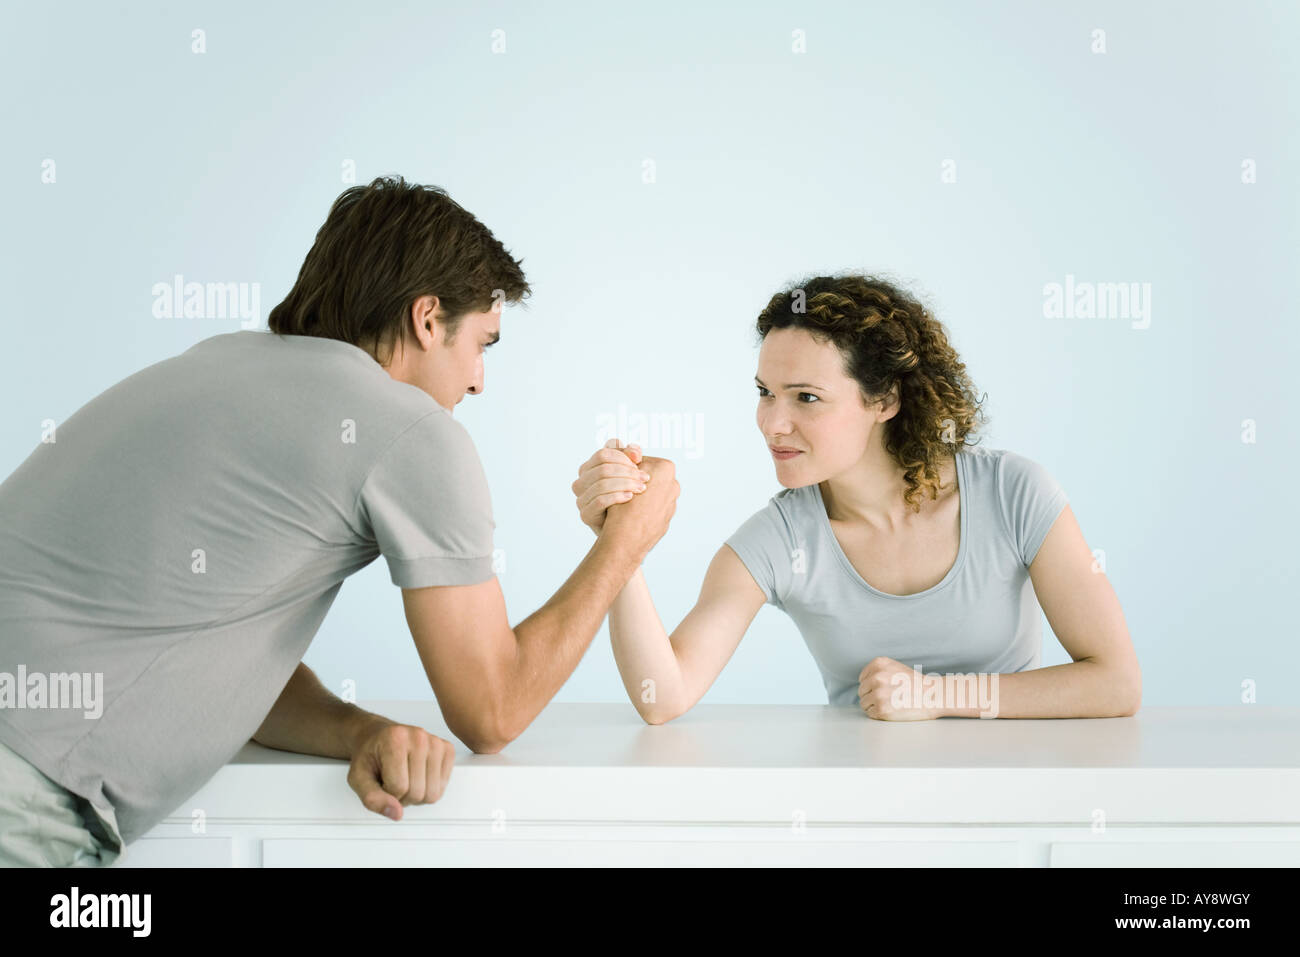 Couple arm wrestling together Stock Photo